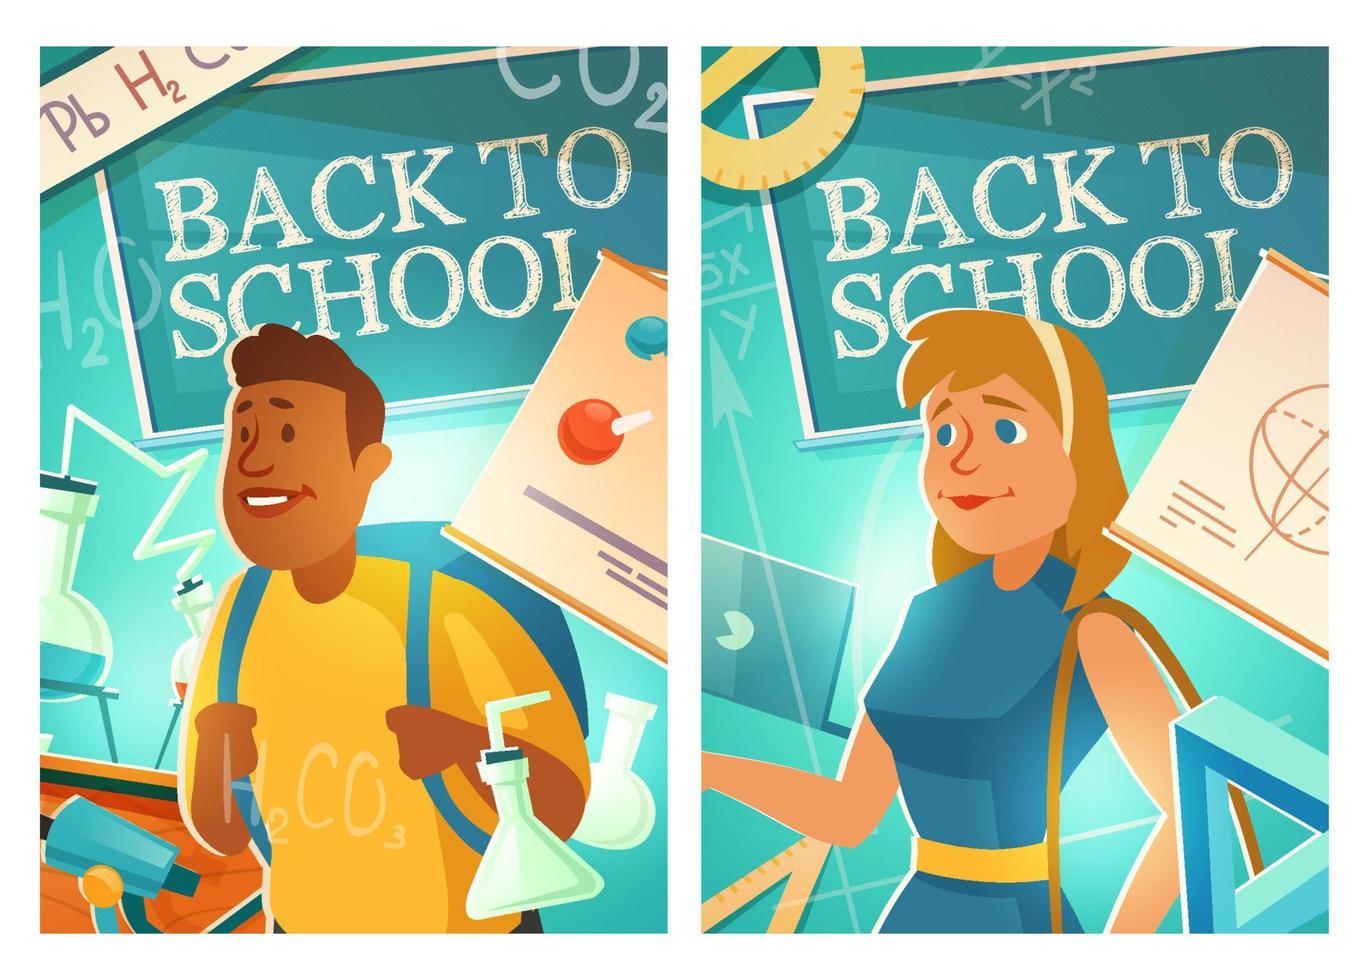 Back to school cartoon posters with students. vector